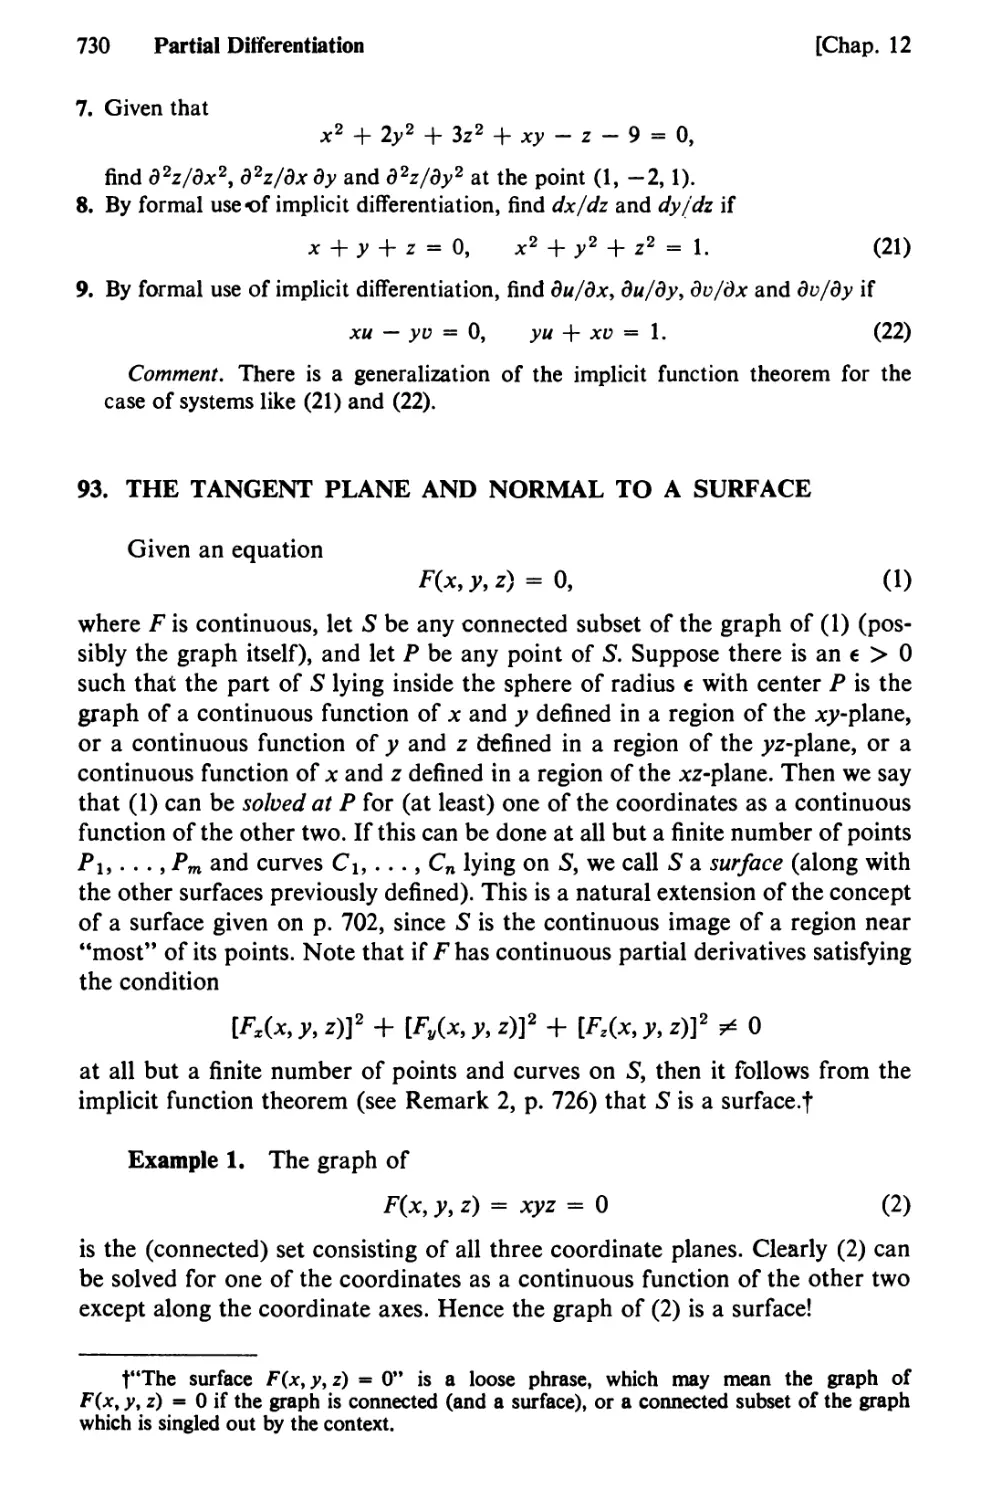 93. The Tangent Plane and Normal to a Surface